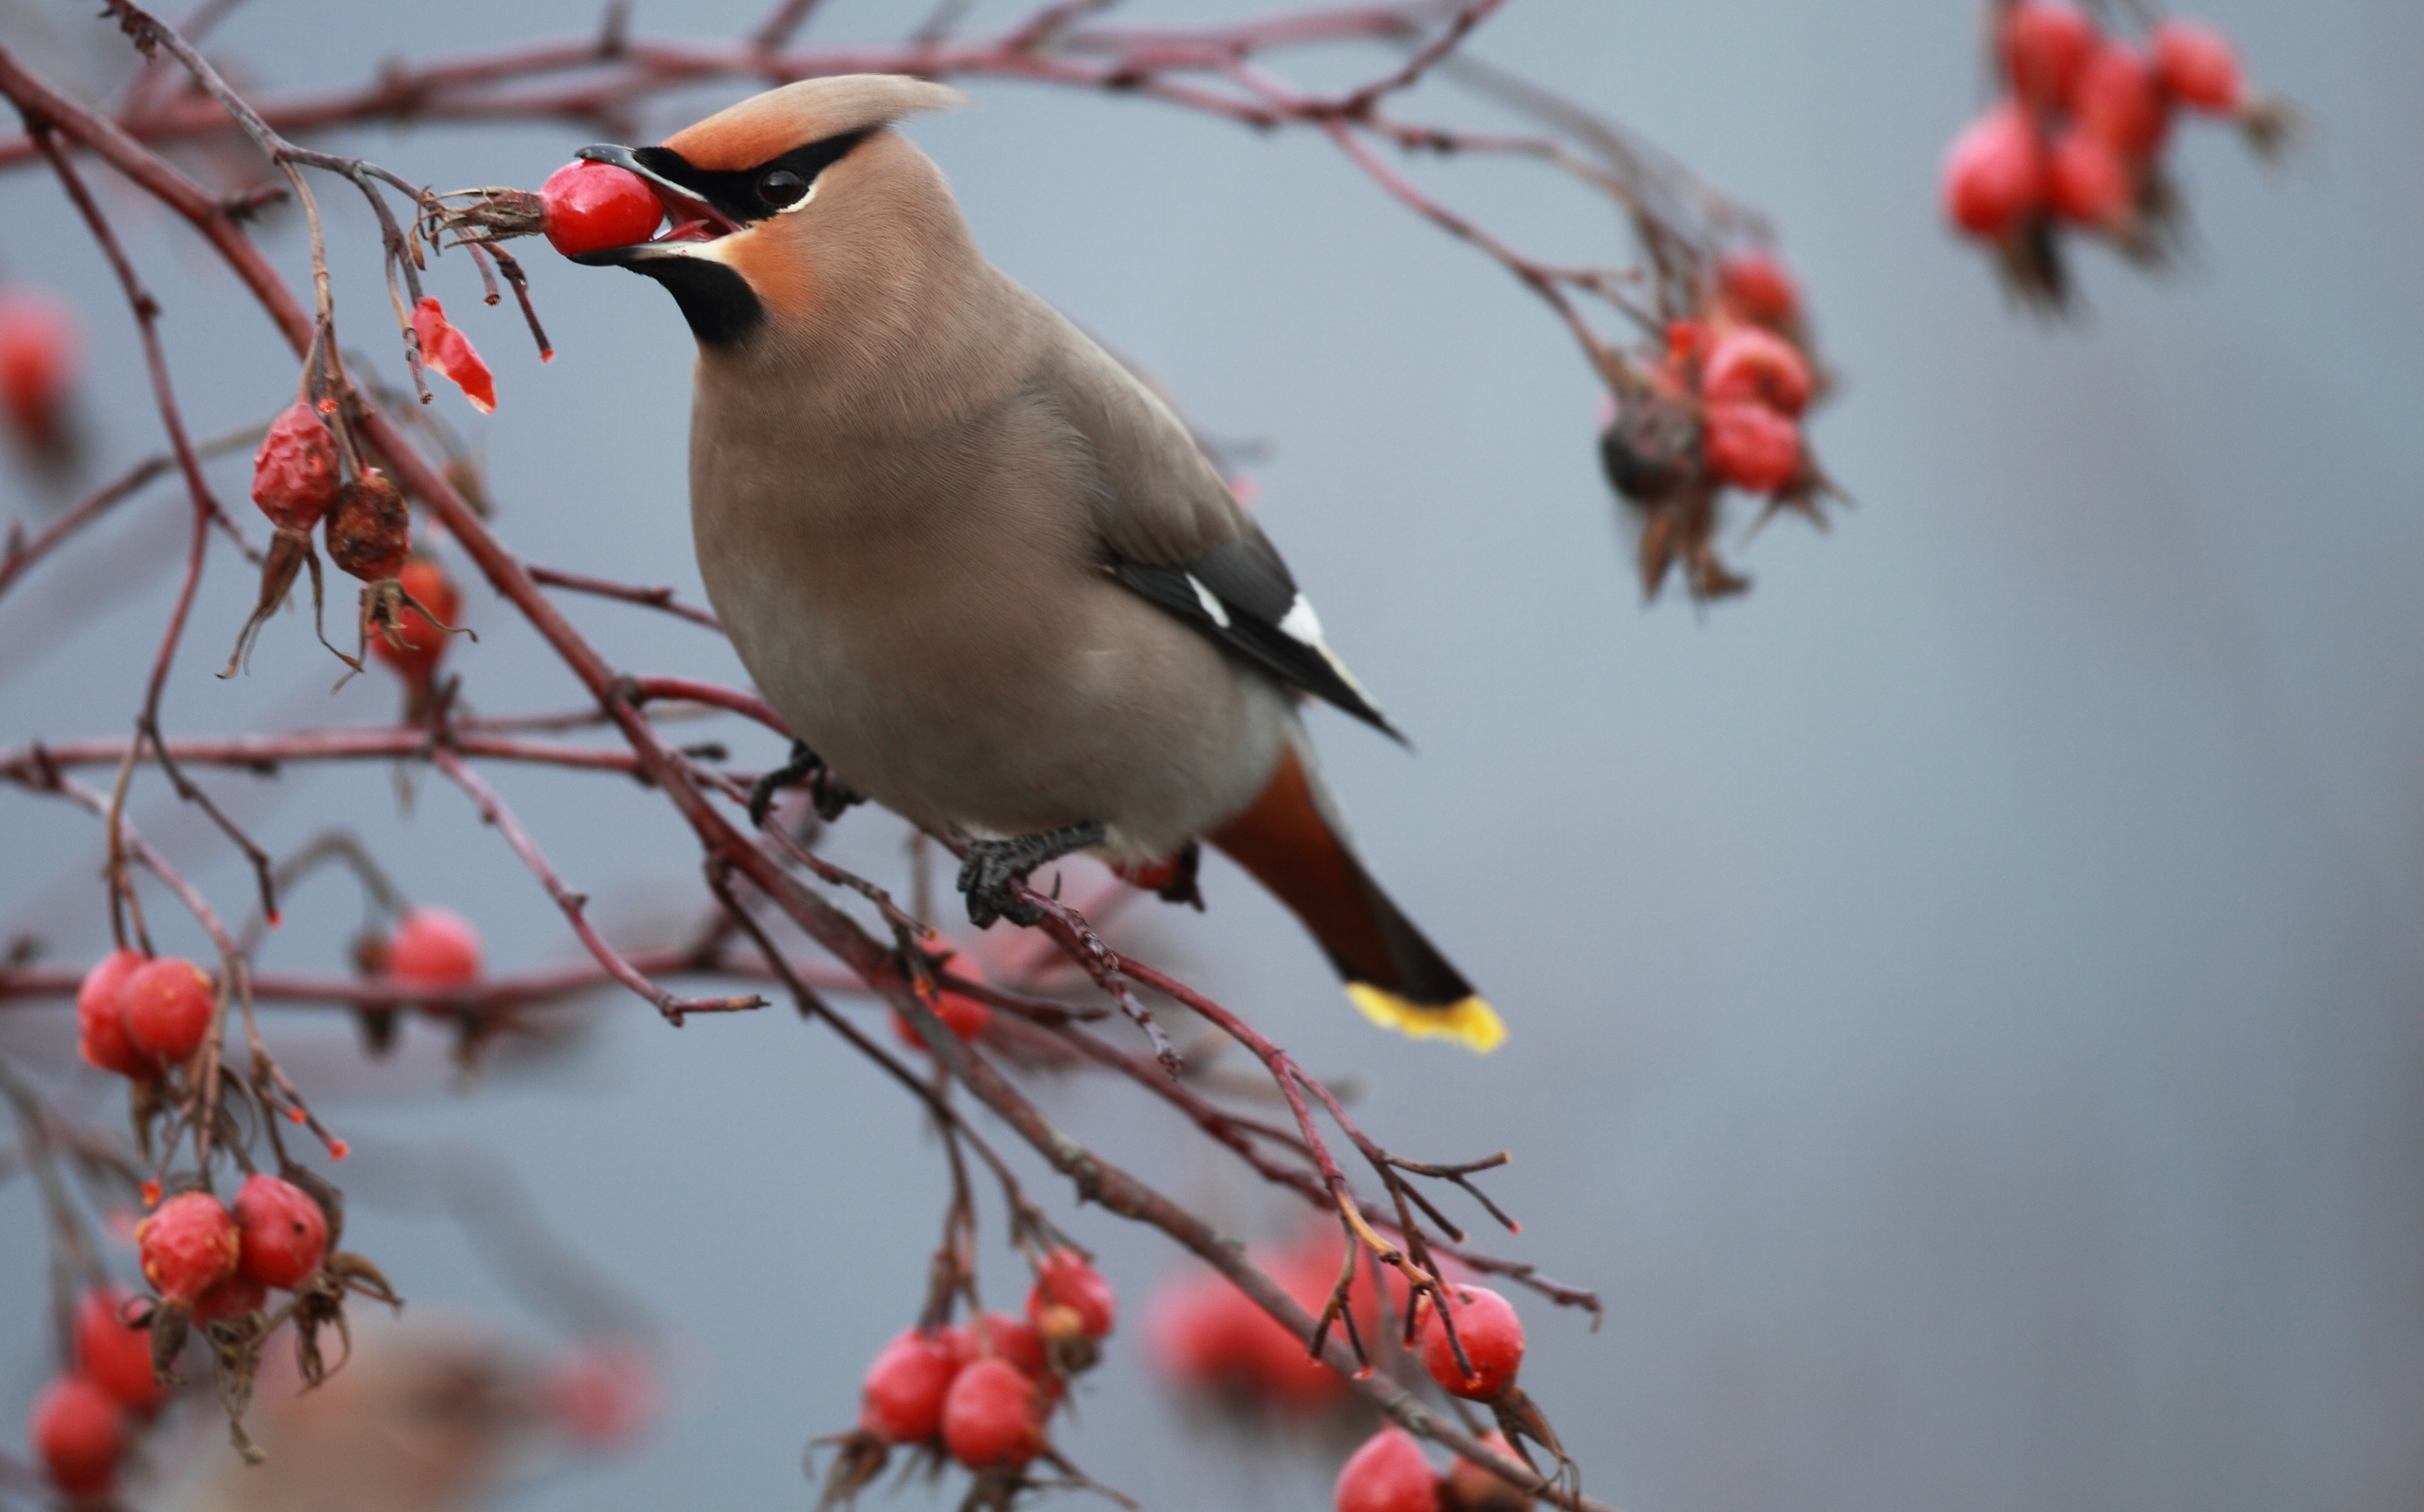 Bohemian waxwing eating red berry with gray cloudy background